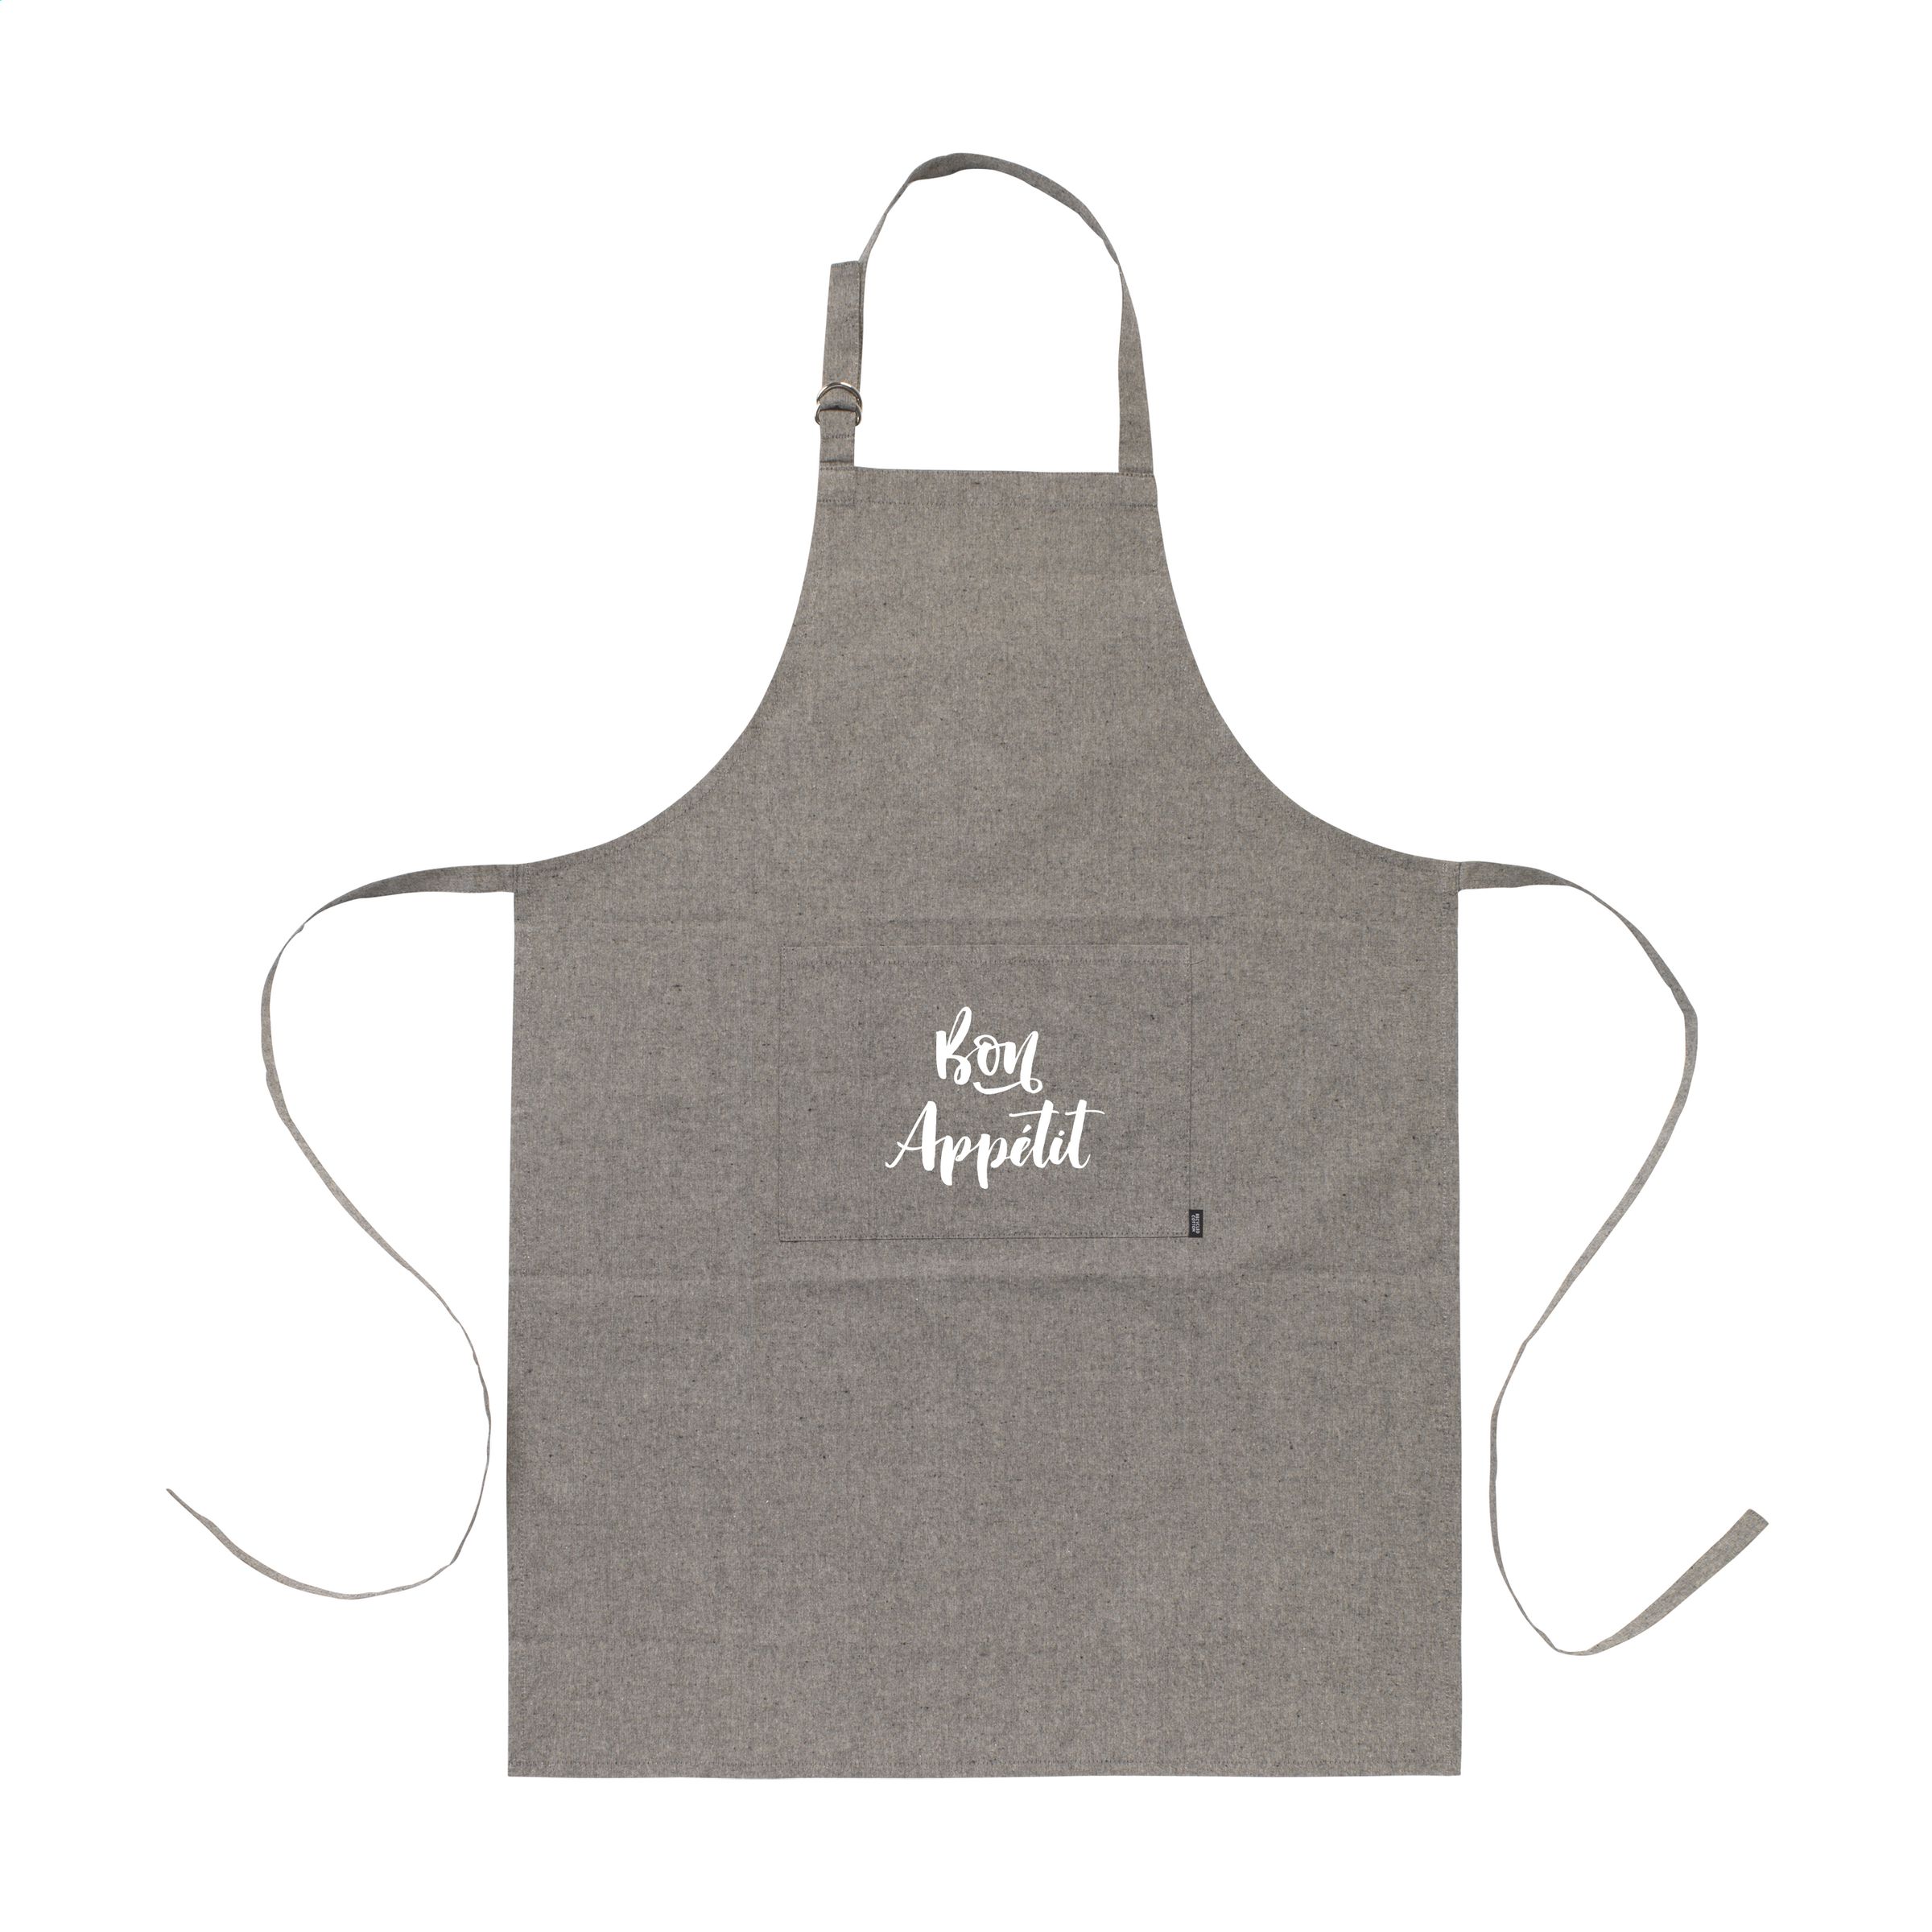 Cocina Recycled Cotton  (160 g/m?) apron